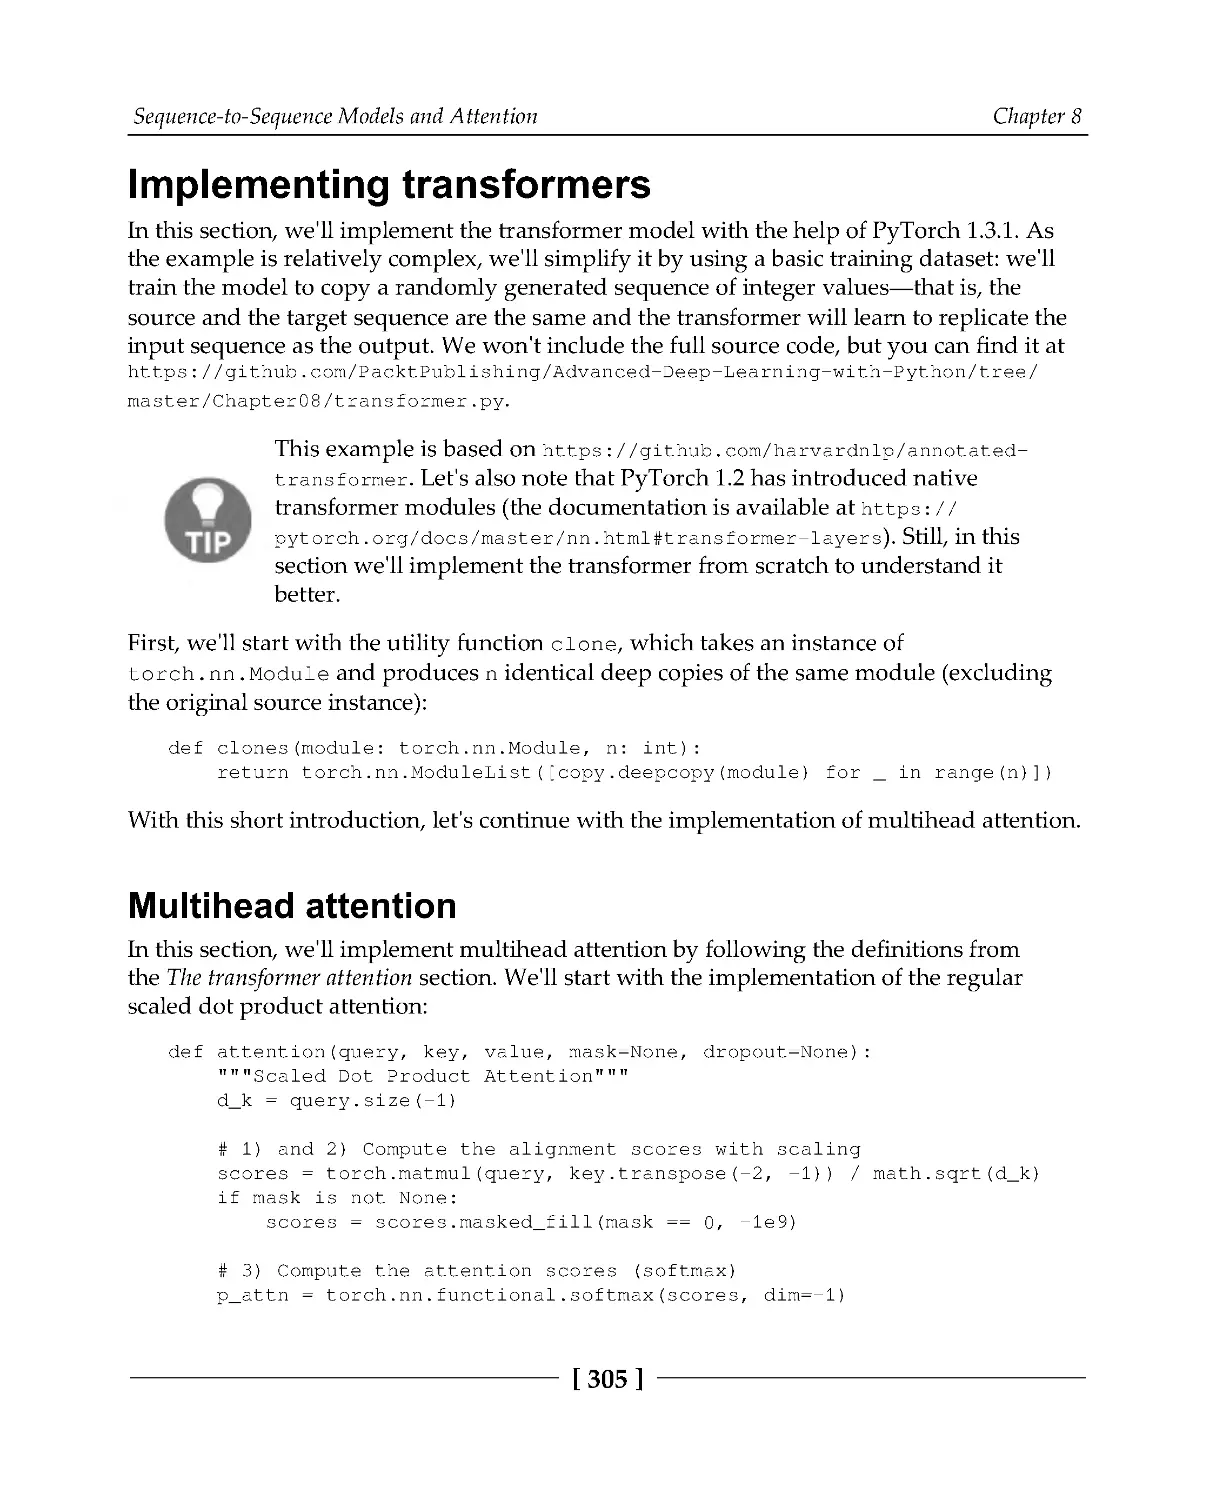 Implementing transformers